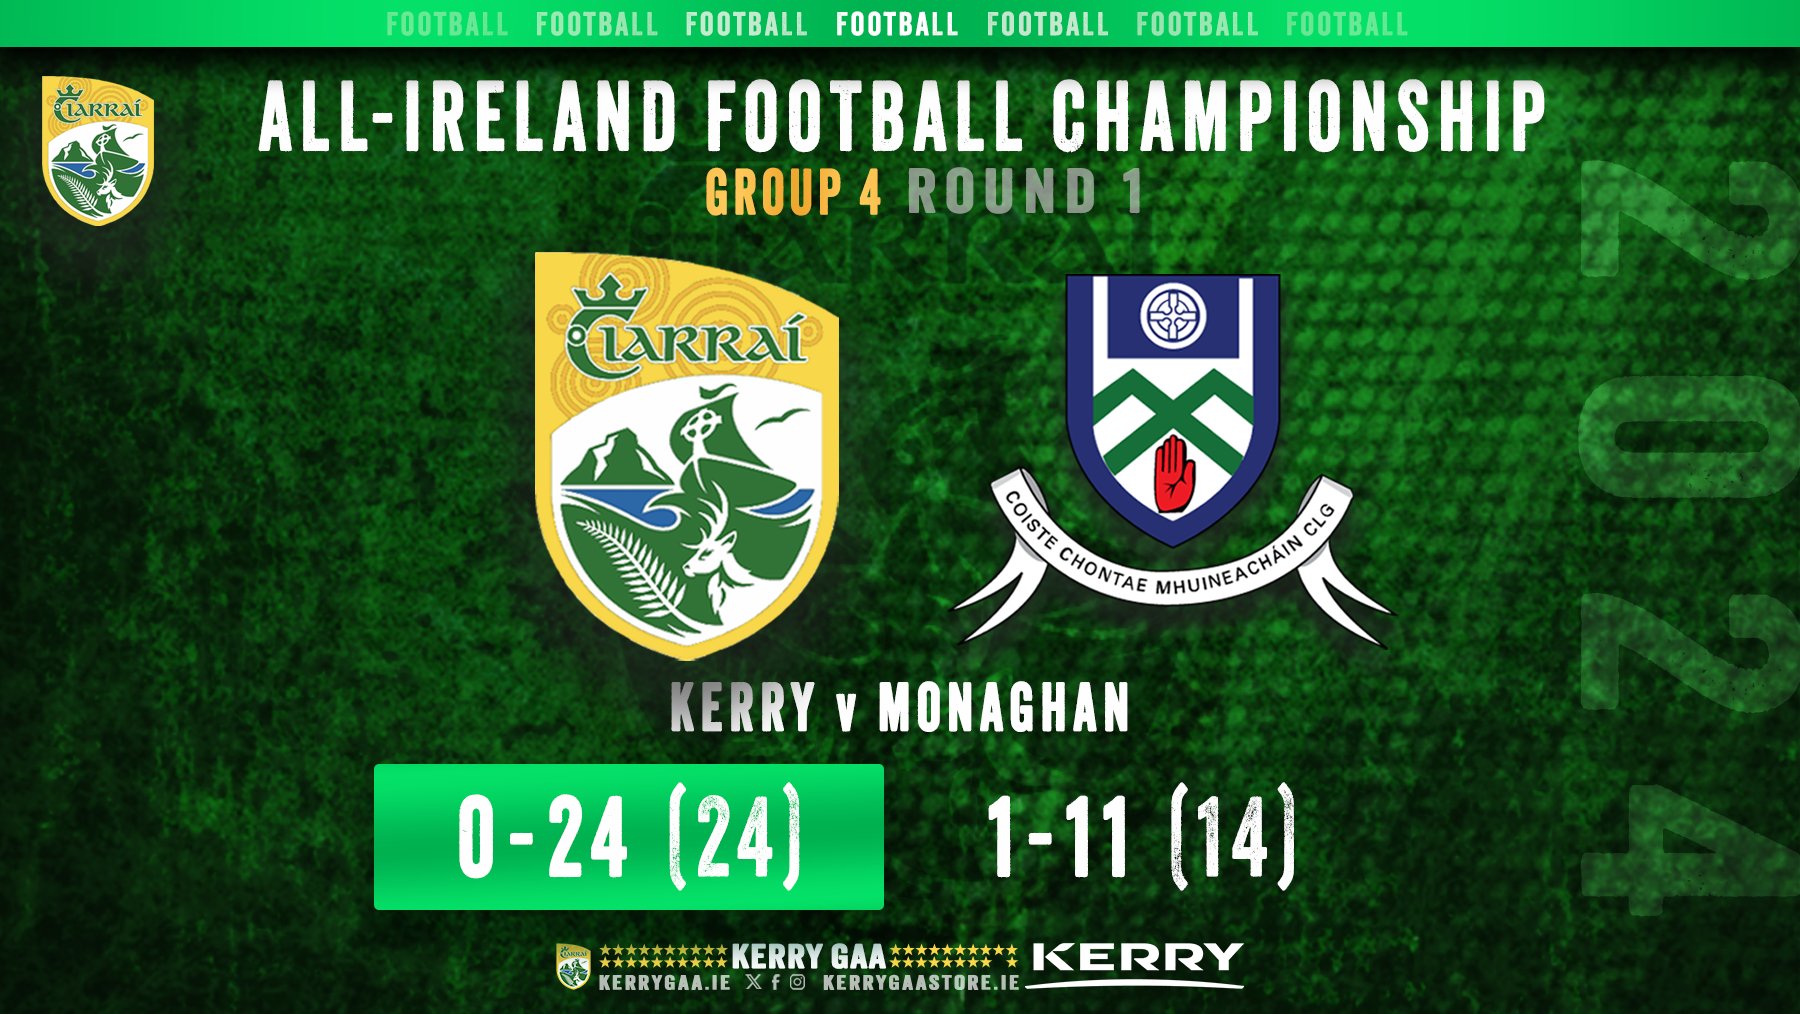 Win for Kerry over Monaghan in All-Ireland SFC